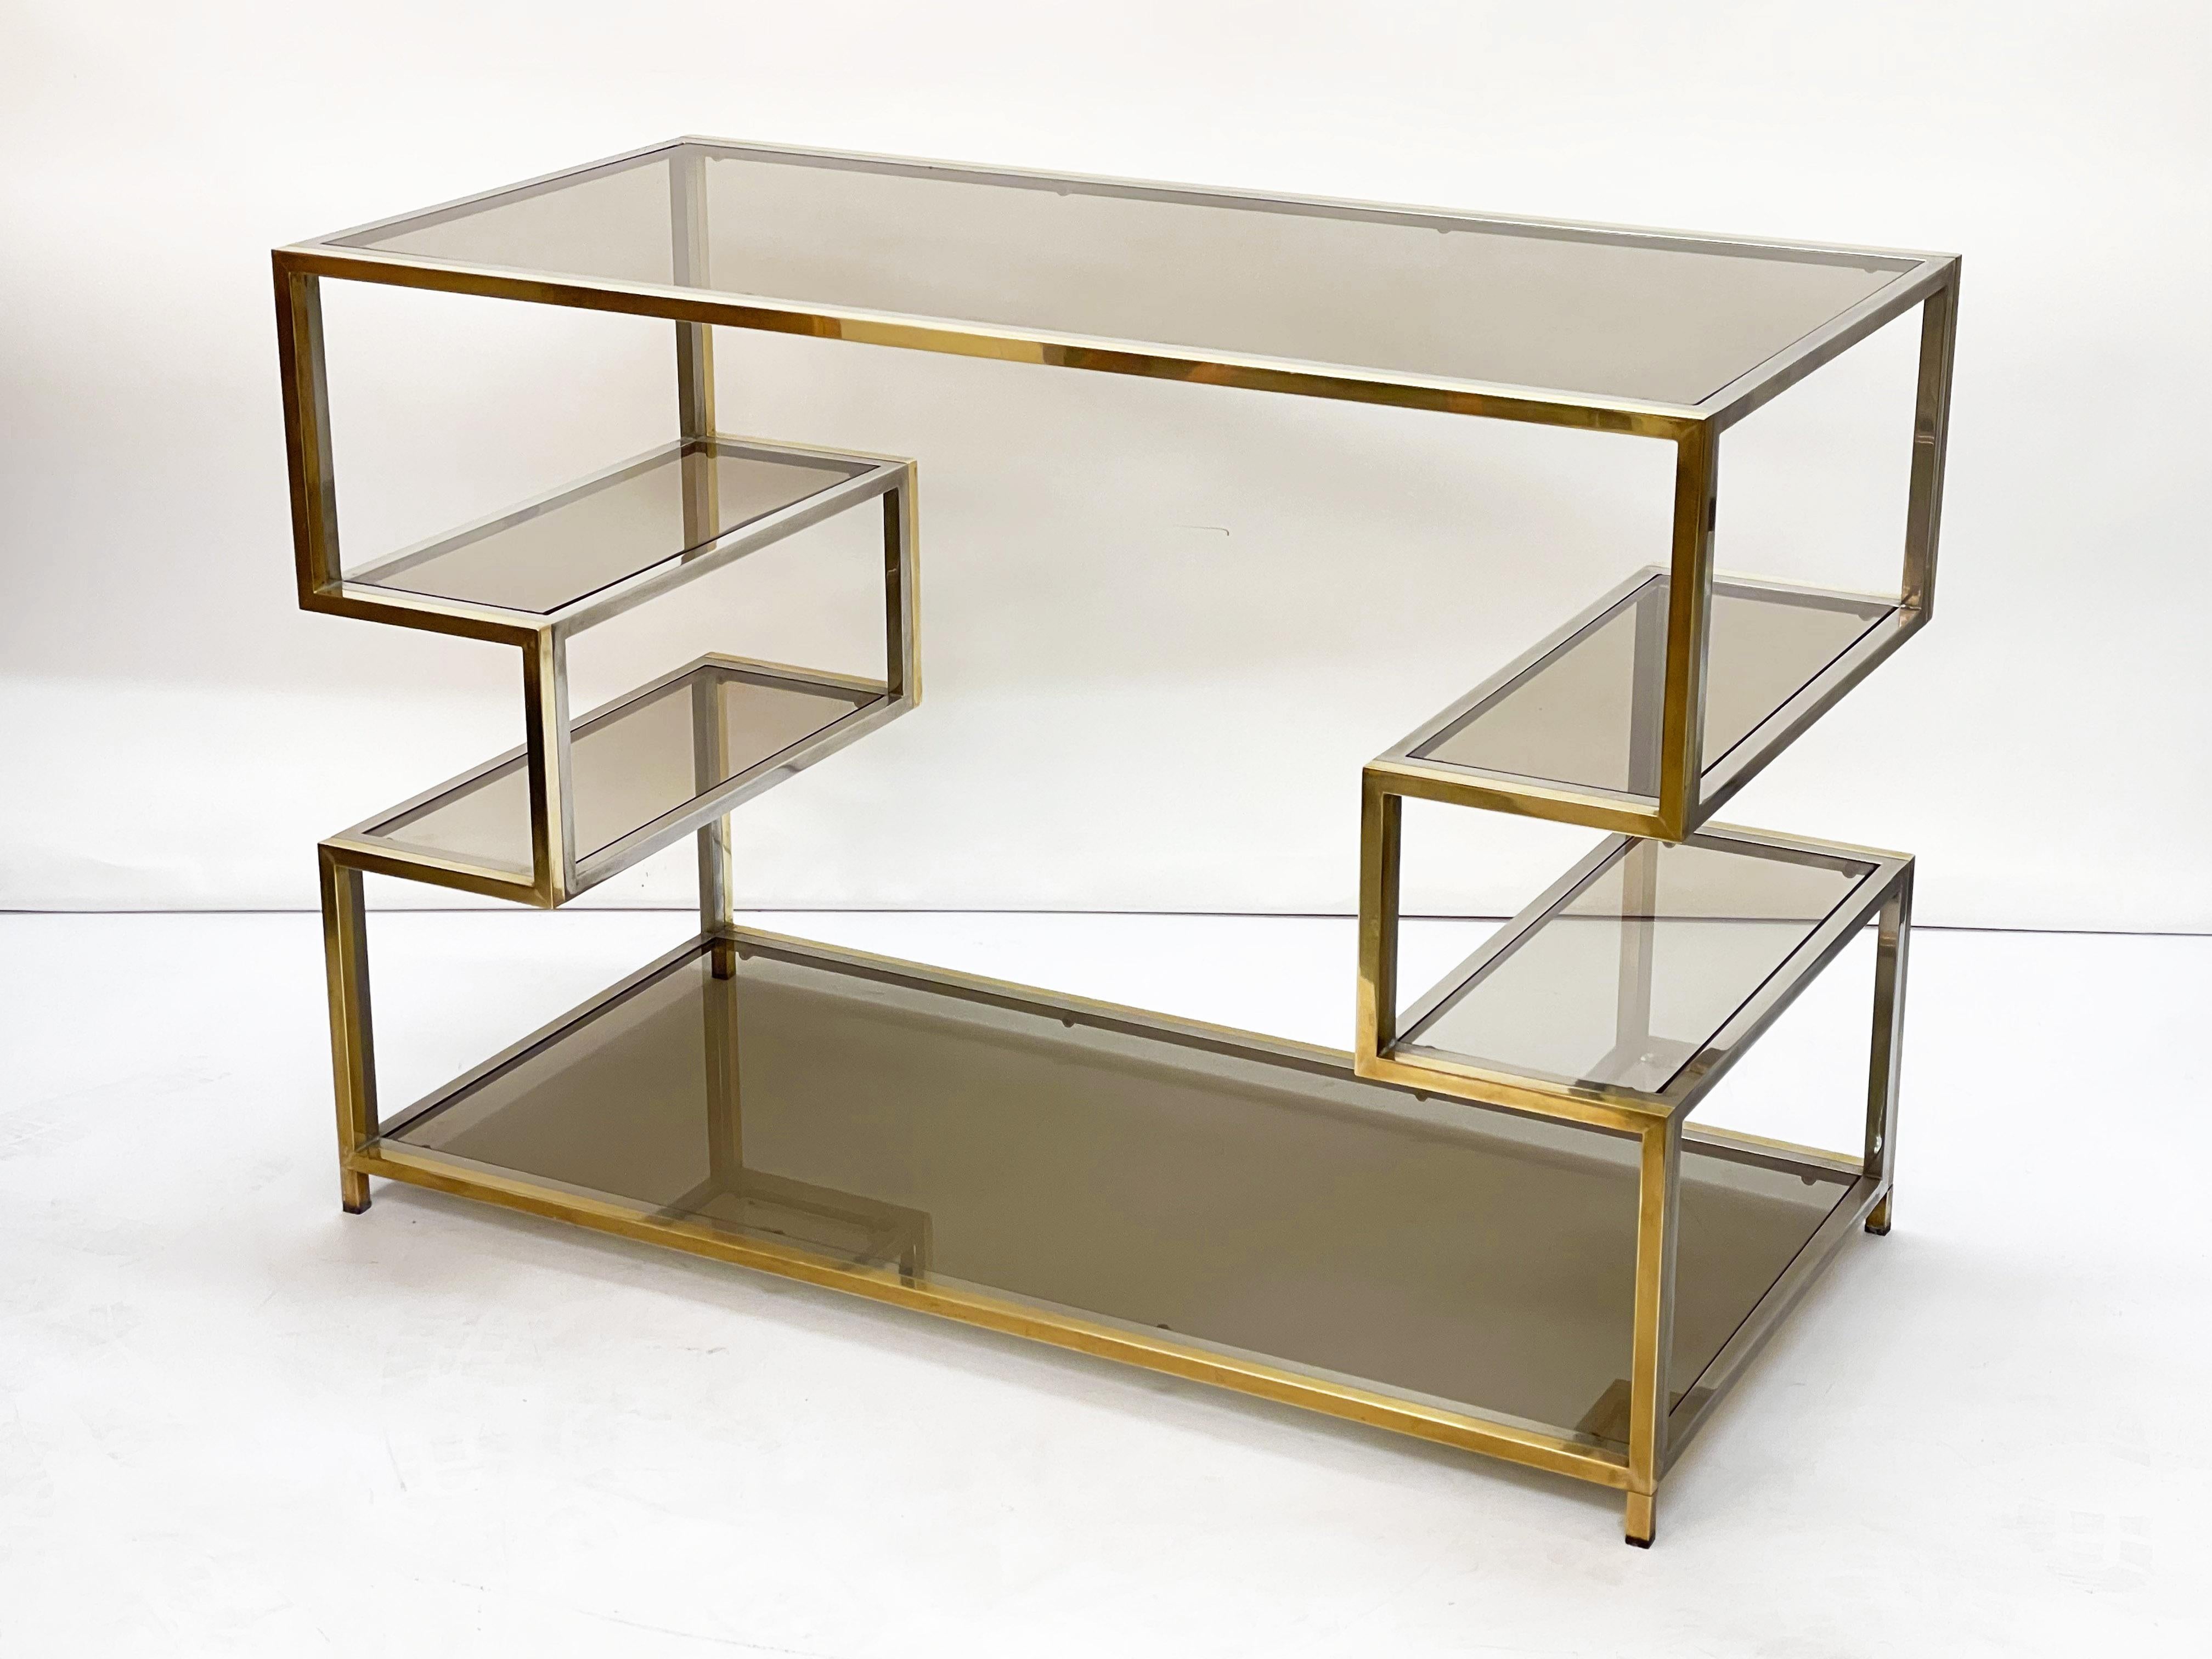 Midcentury Gold Brass and Glass Italian Console Table in Romeo Rega Style, 1970s For Sale 6